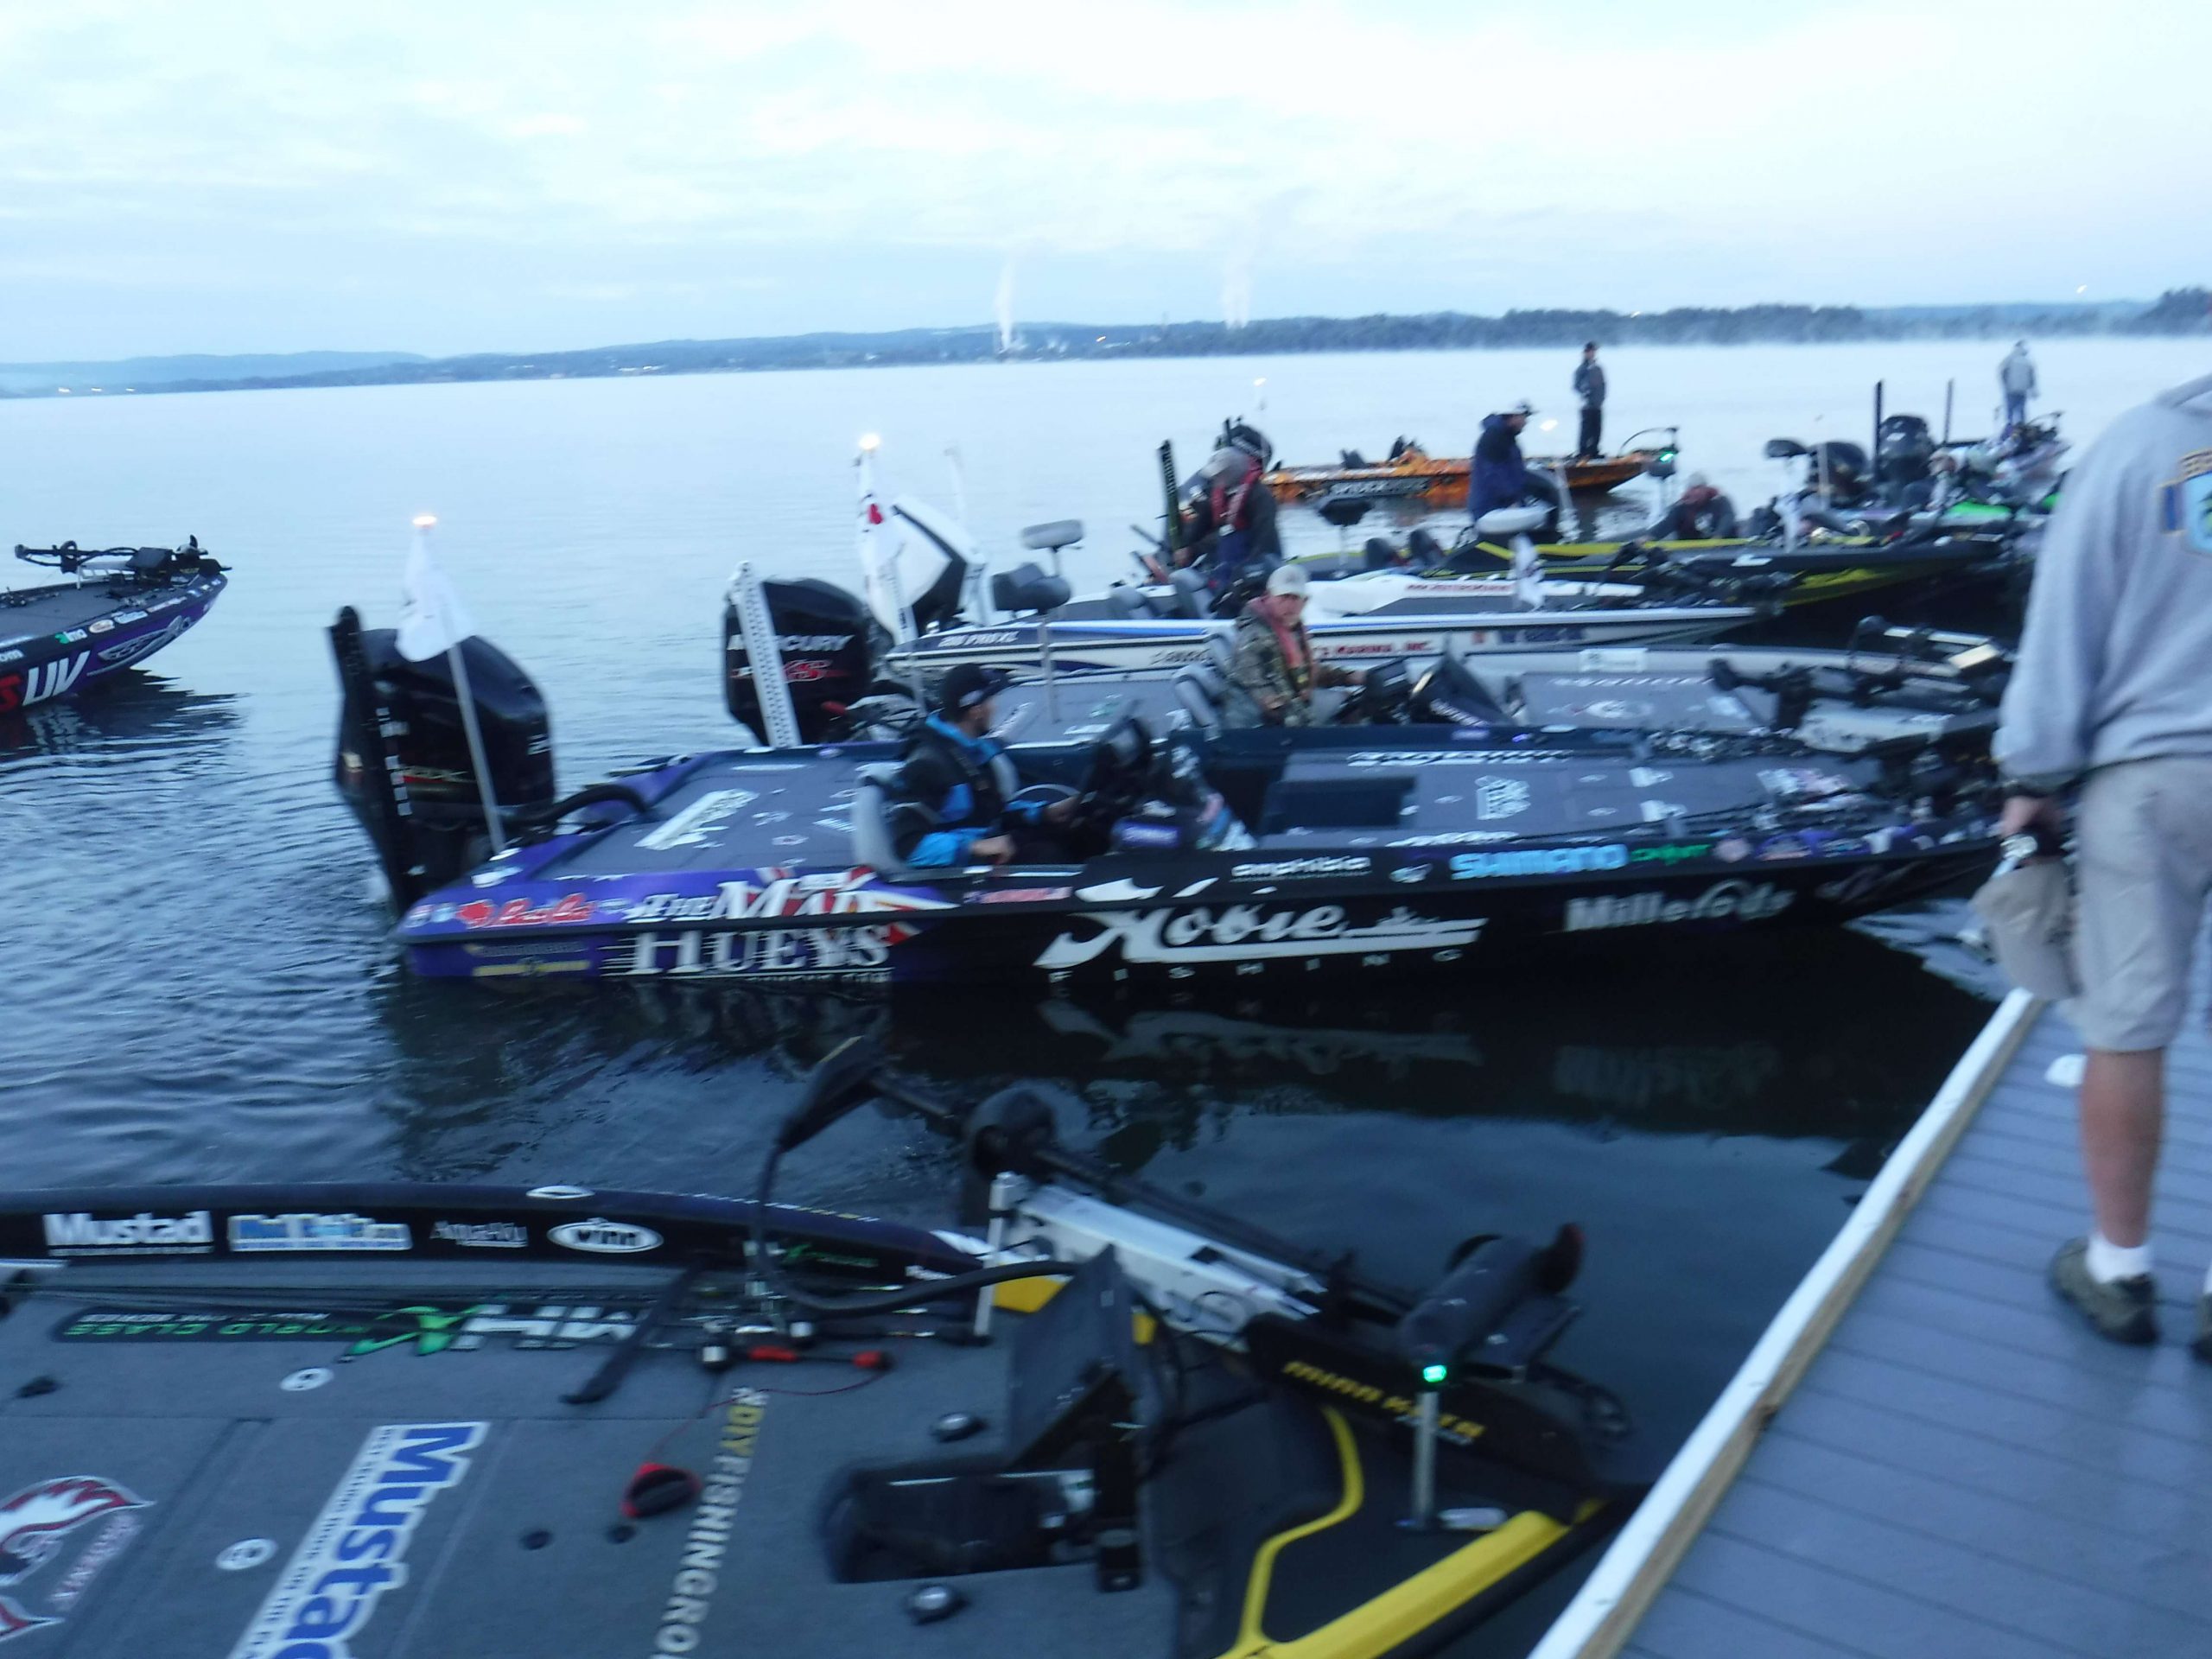 On Sept. 3, 2016, 10 Bassmaster Elite Series pros pitted their skills against 10 NY B.A.S.S. Nation anglers on Onondaga Lake, Syracuse, NY.